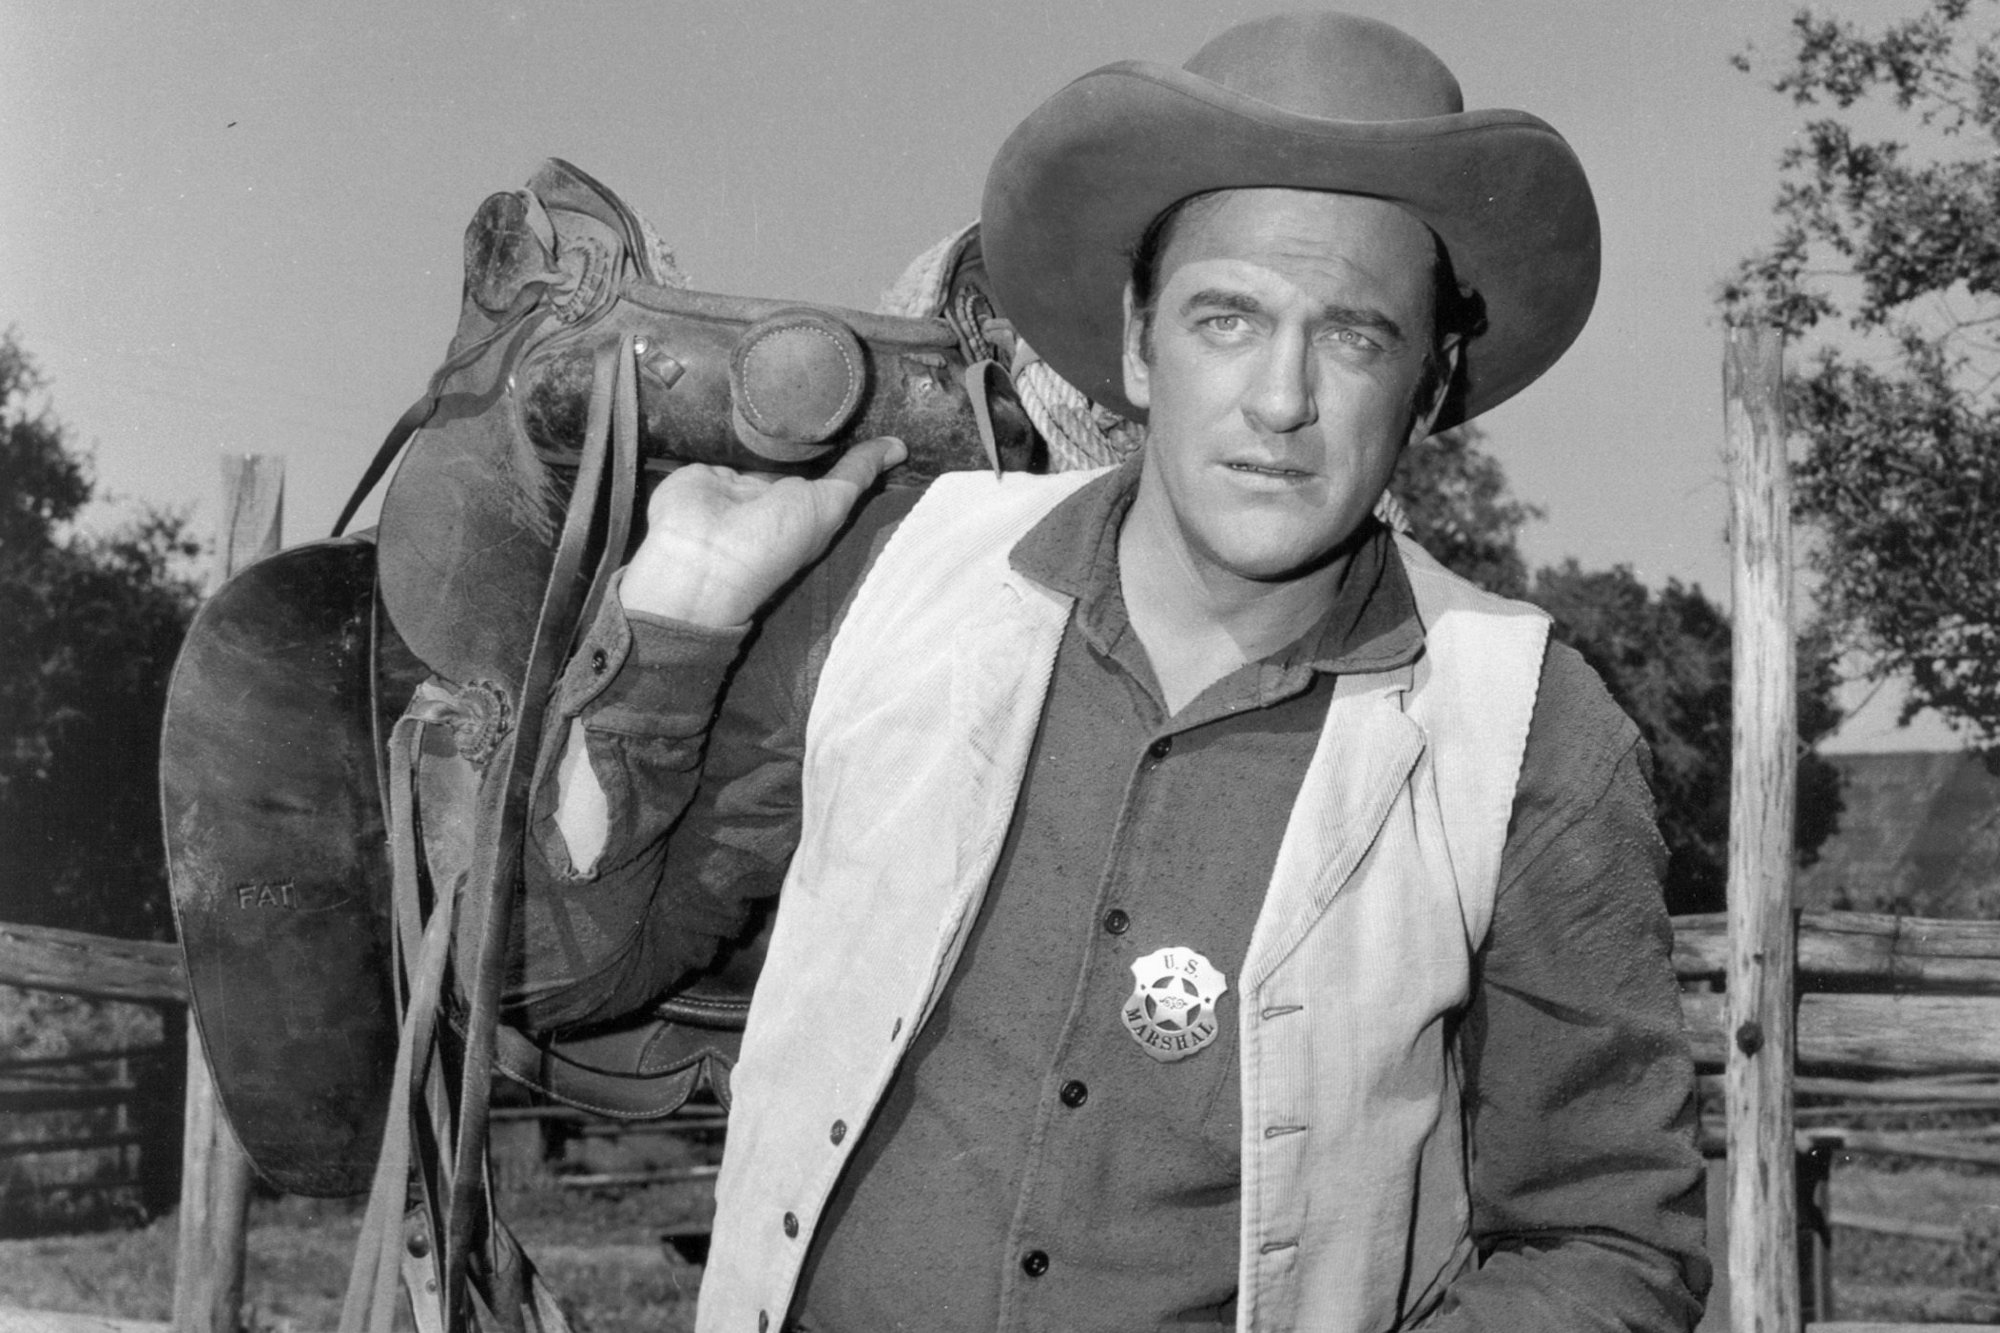 'Gunsmoke' James Arness as U.S. Marshal Matt Dillon in a black-and-white picture holding a horse saddle over his back